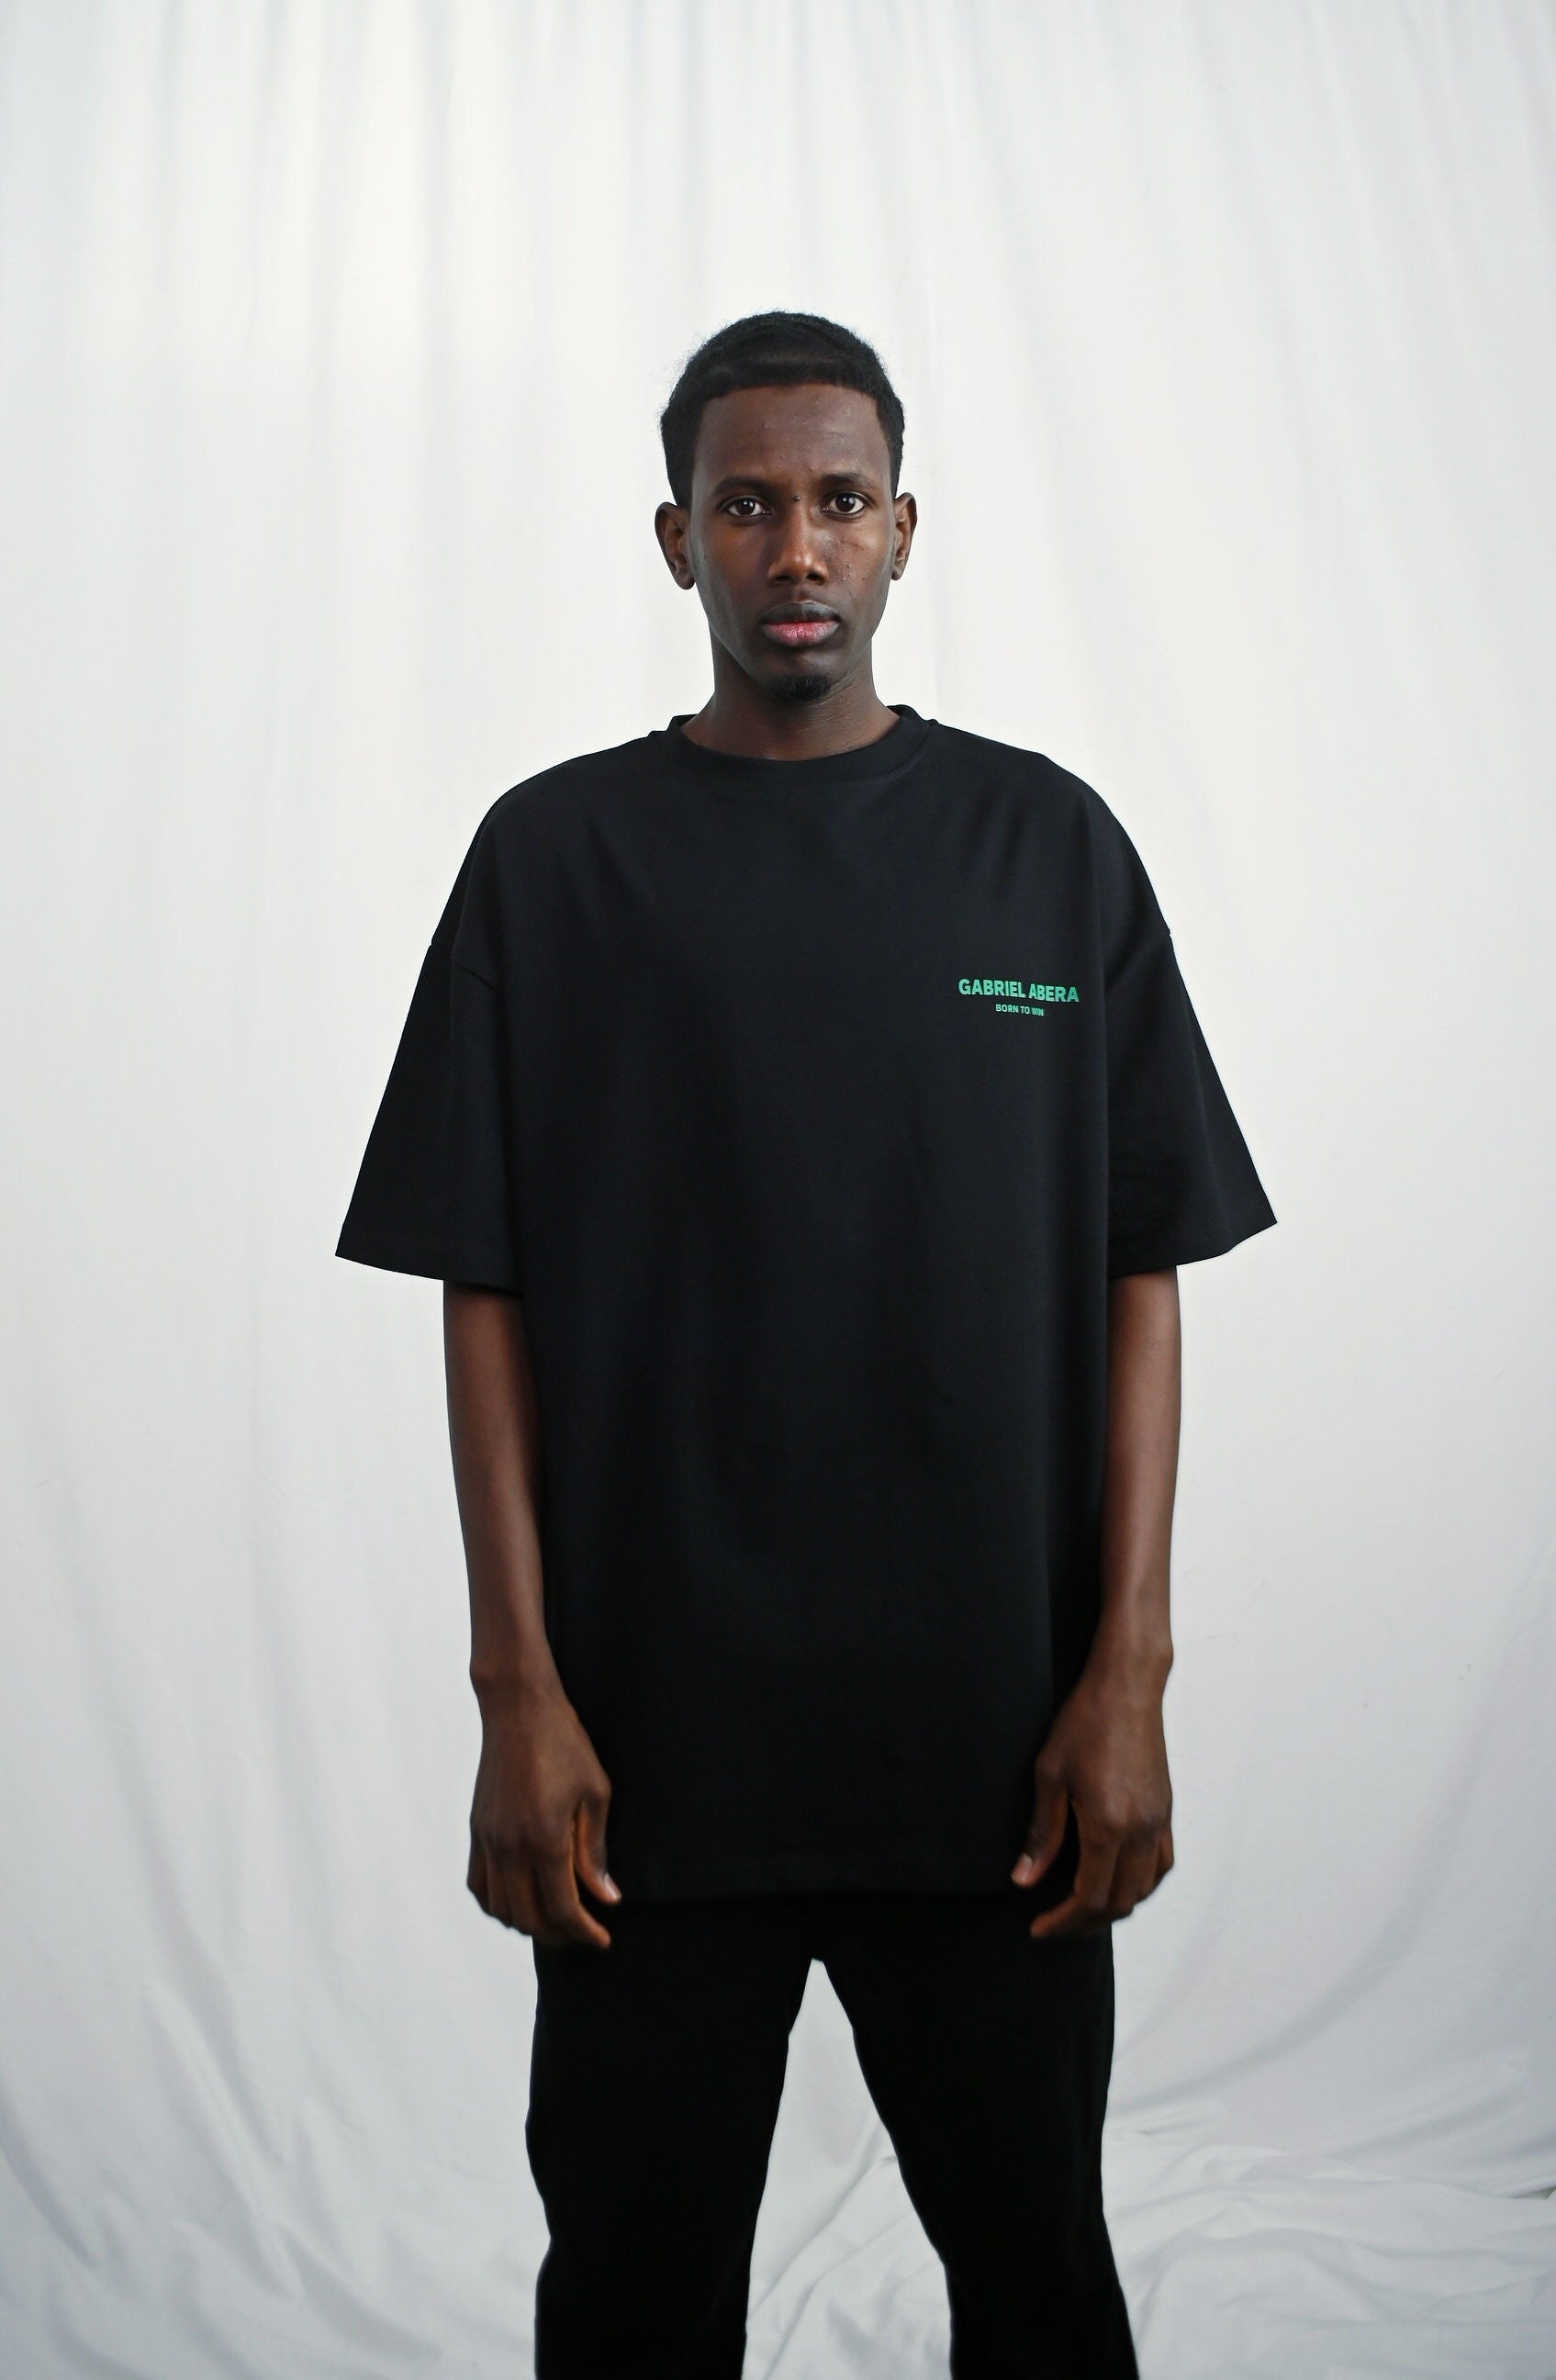 Male model wearing a Black oversize tshirt with green born to win design on the back